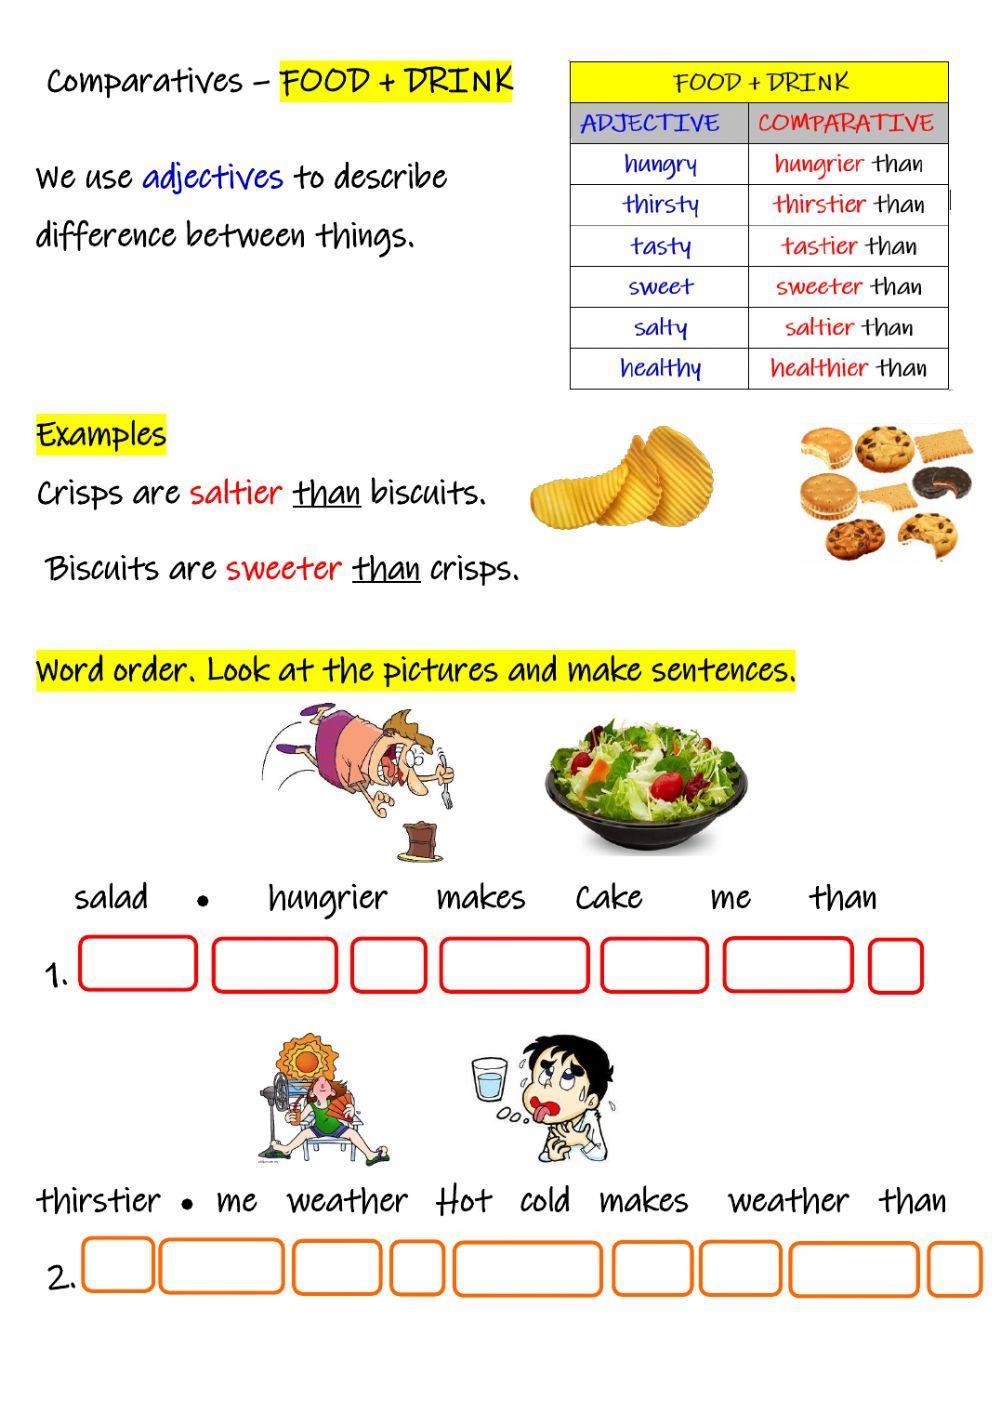 Comparatives Food and Drink